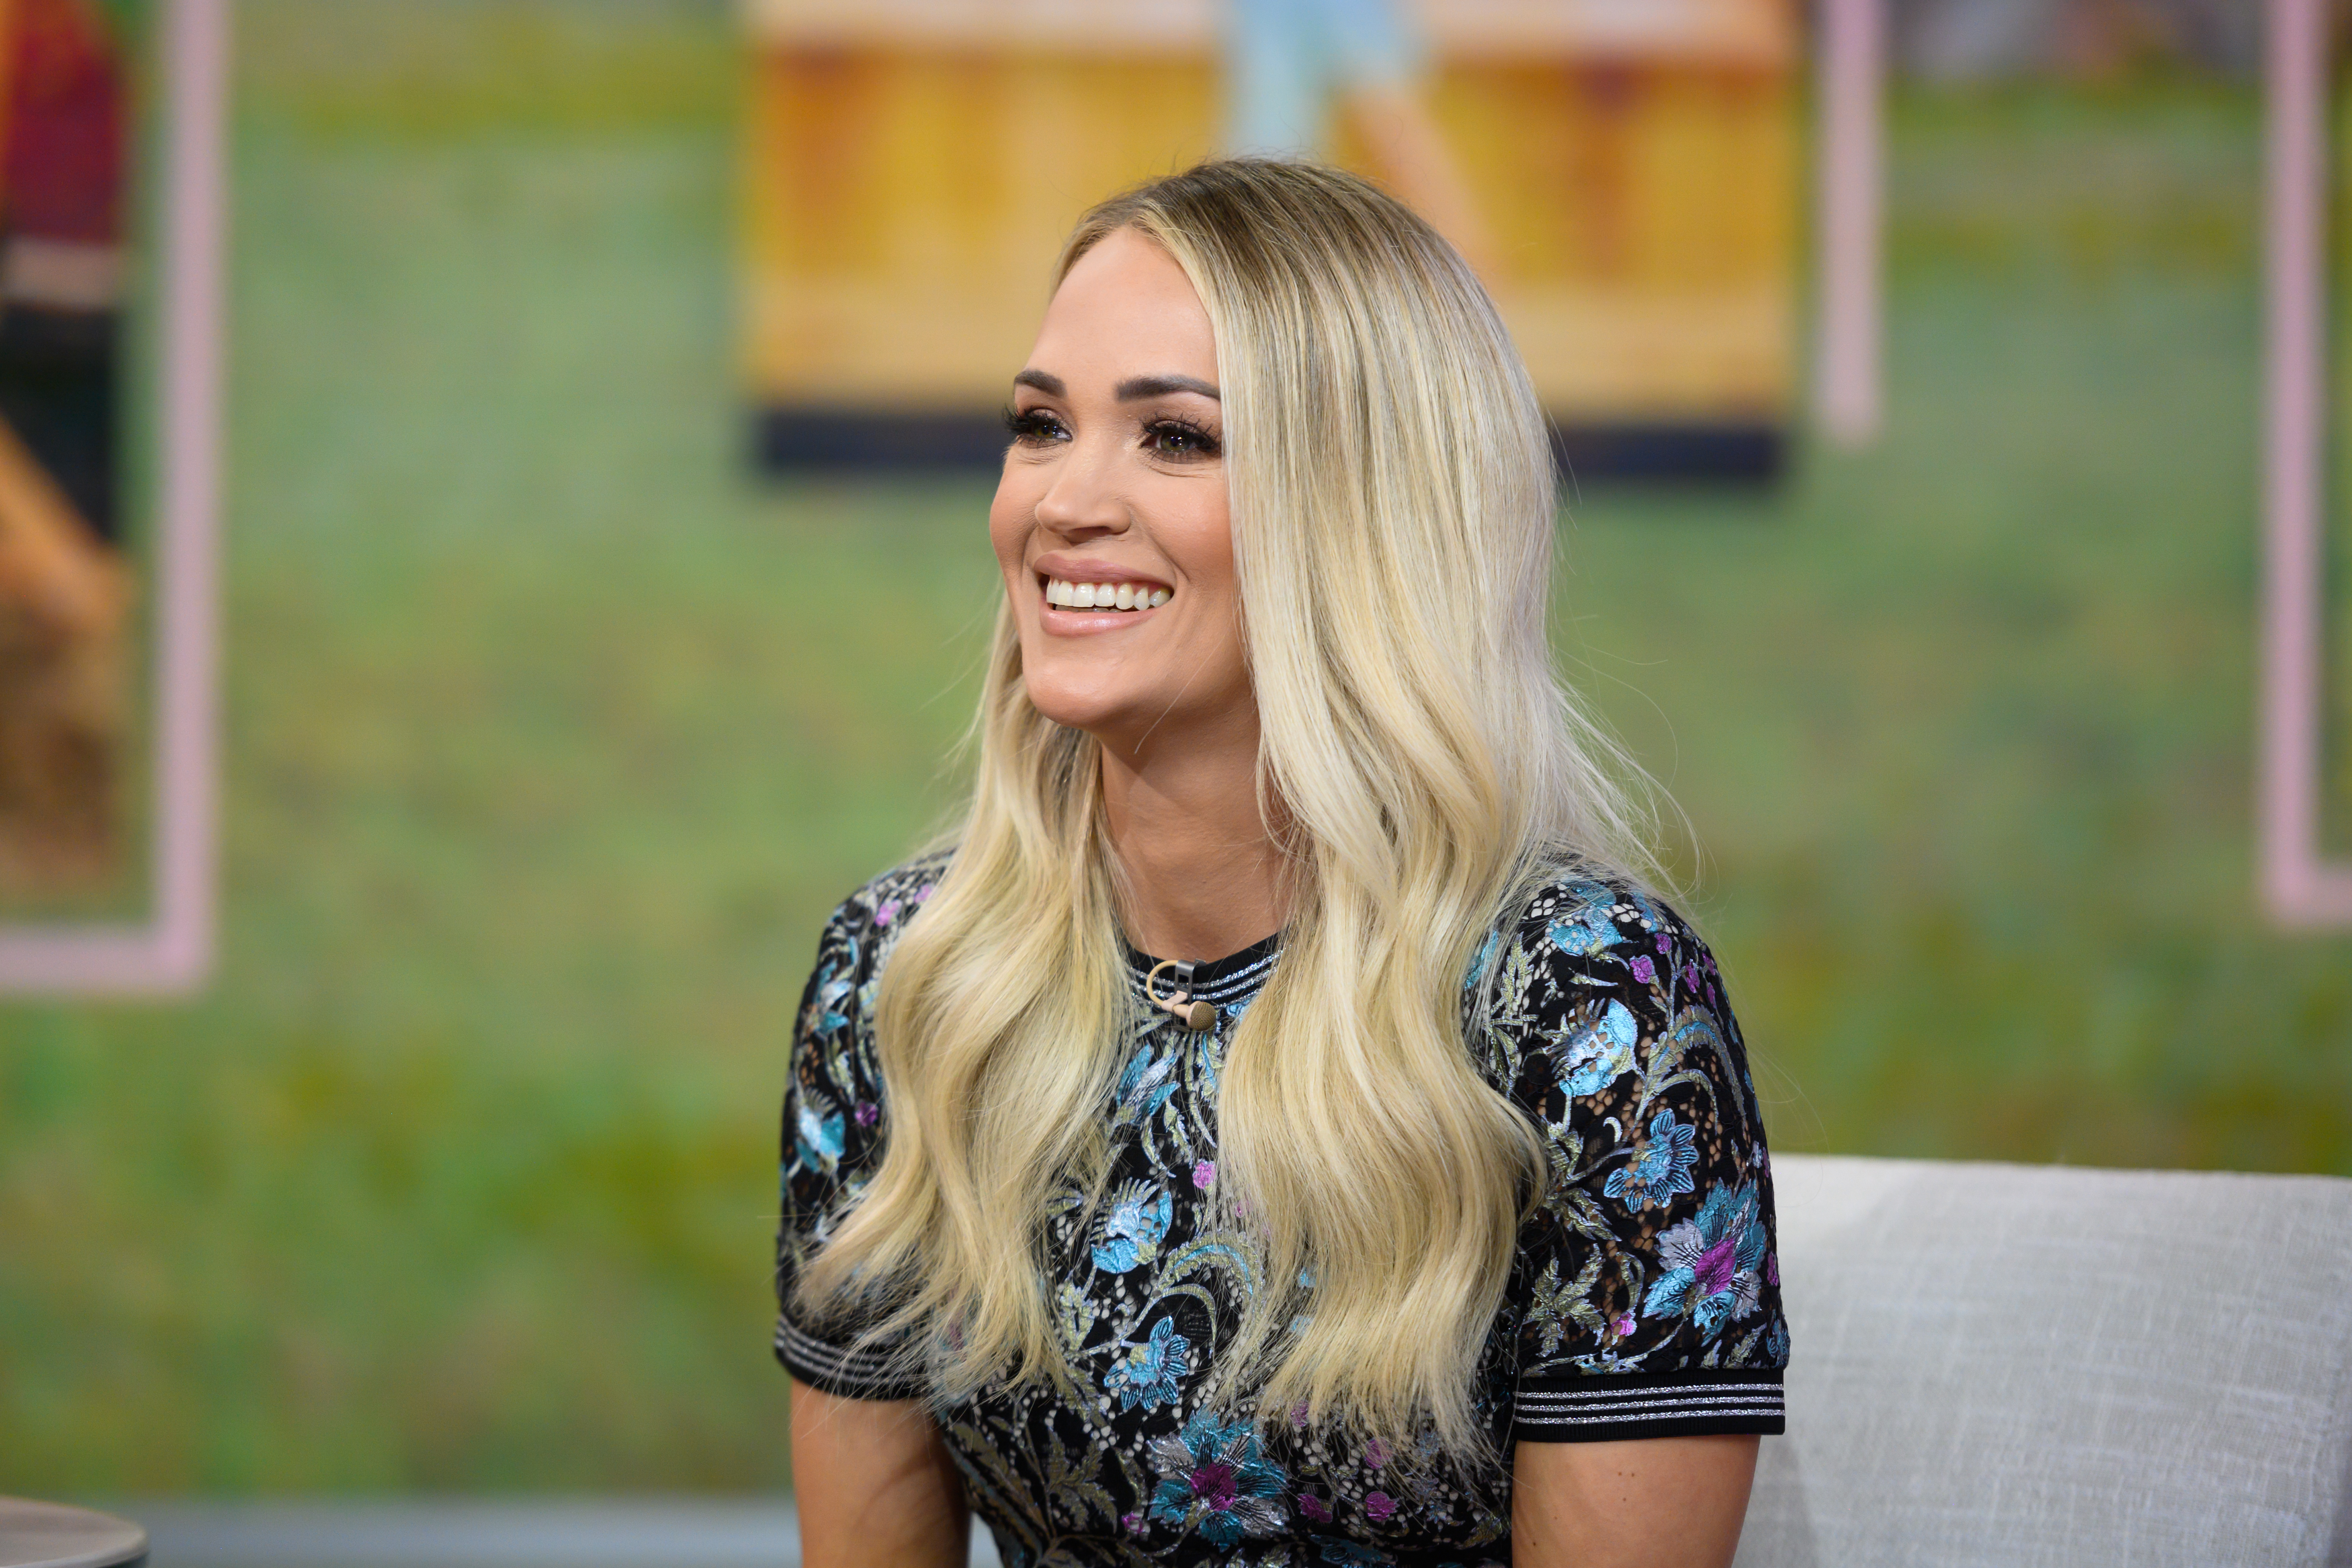 Carrie Underwood on season 69 of the "Today" show on March 3, 2020 | Source: Getty Images